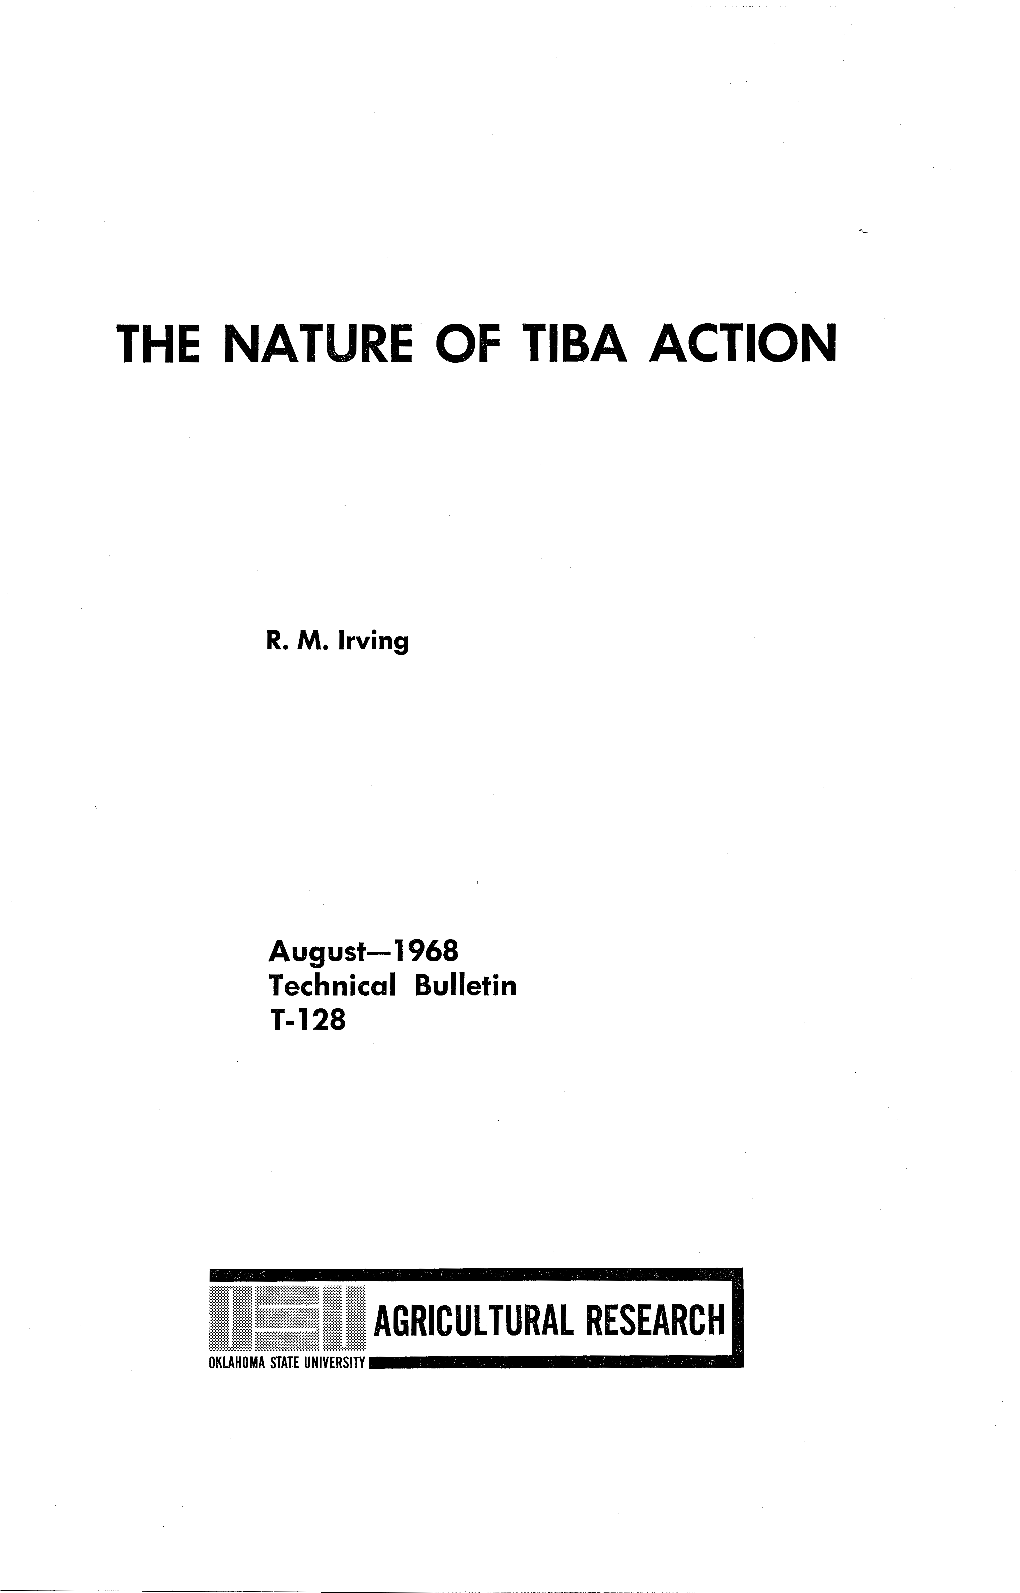 The Nature of Tiba Action